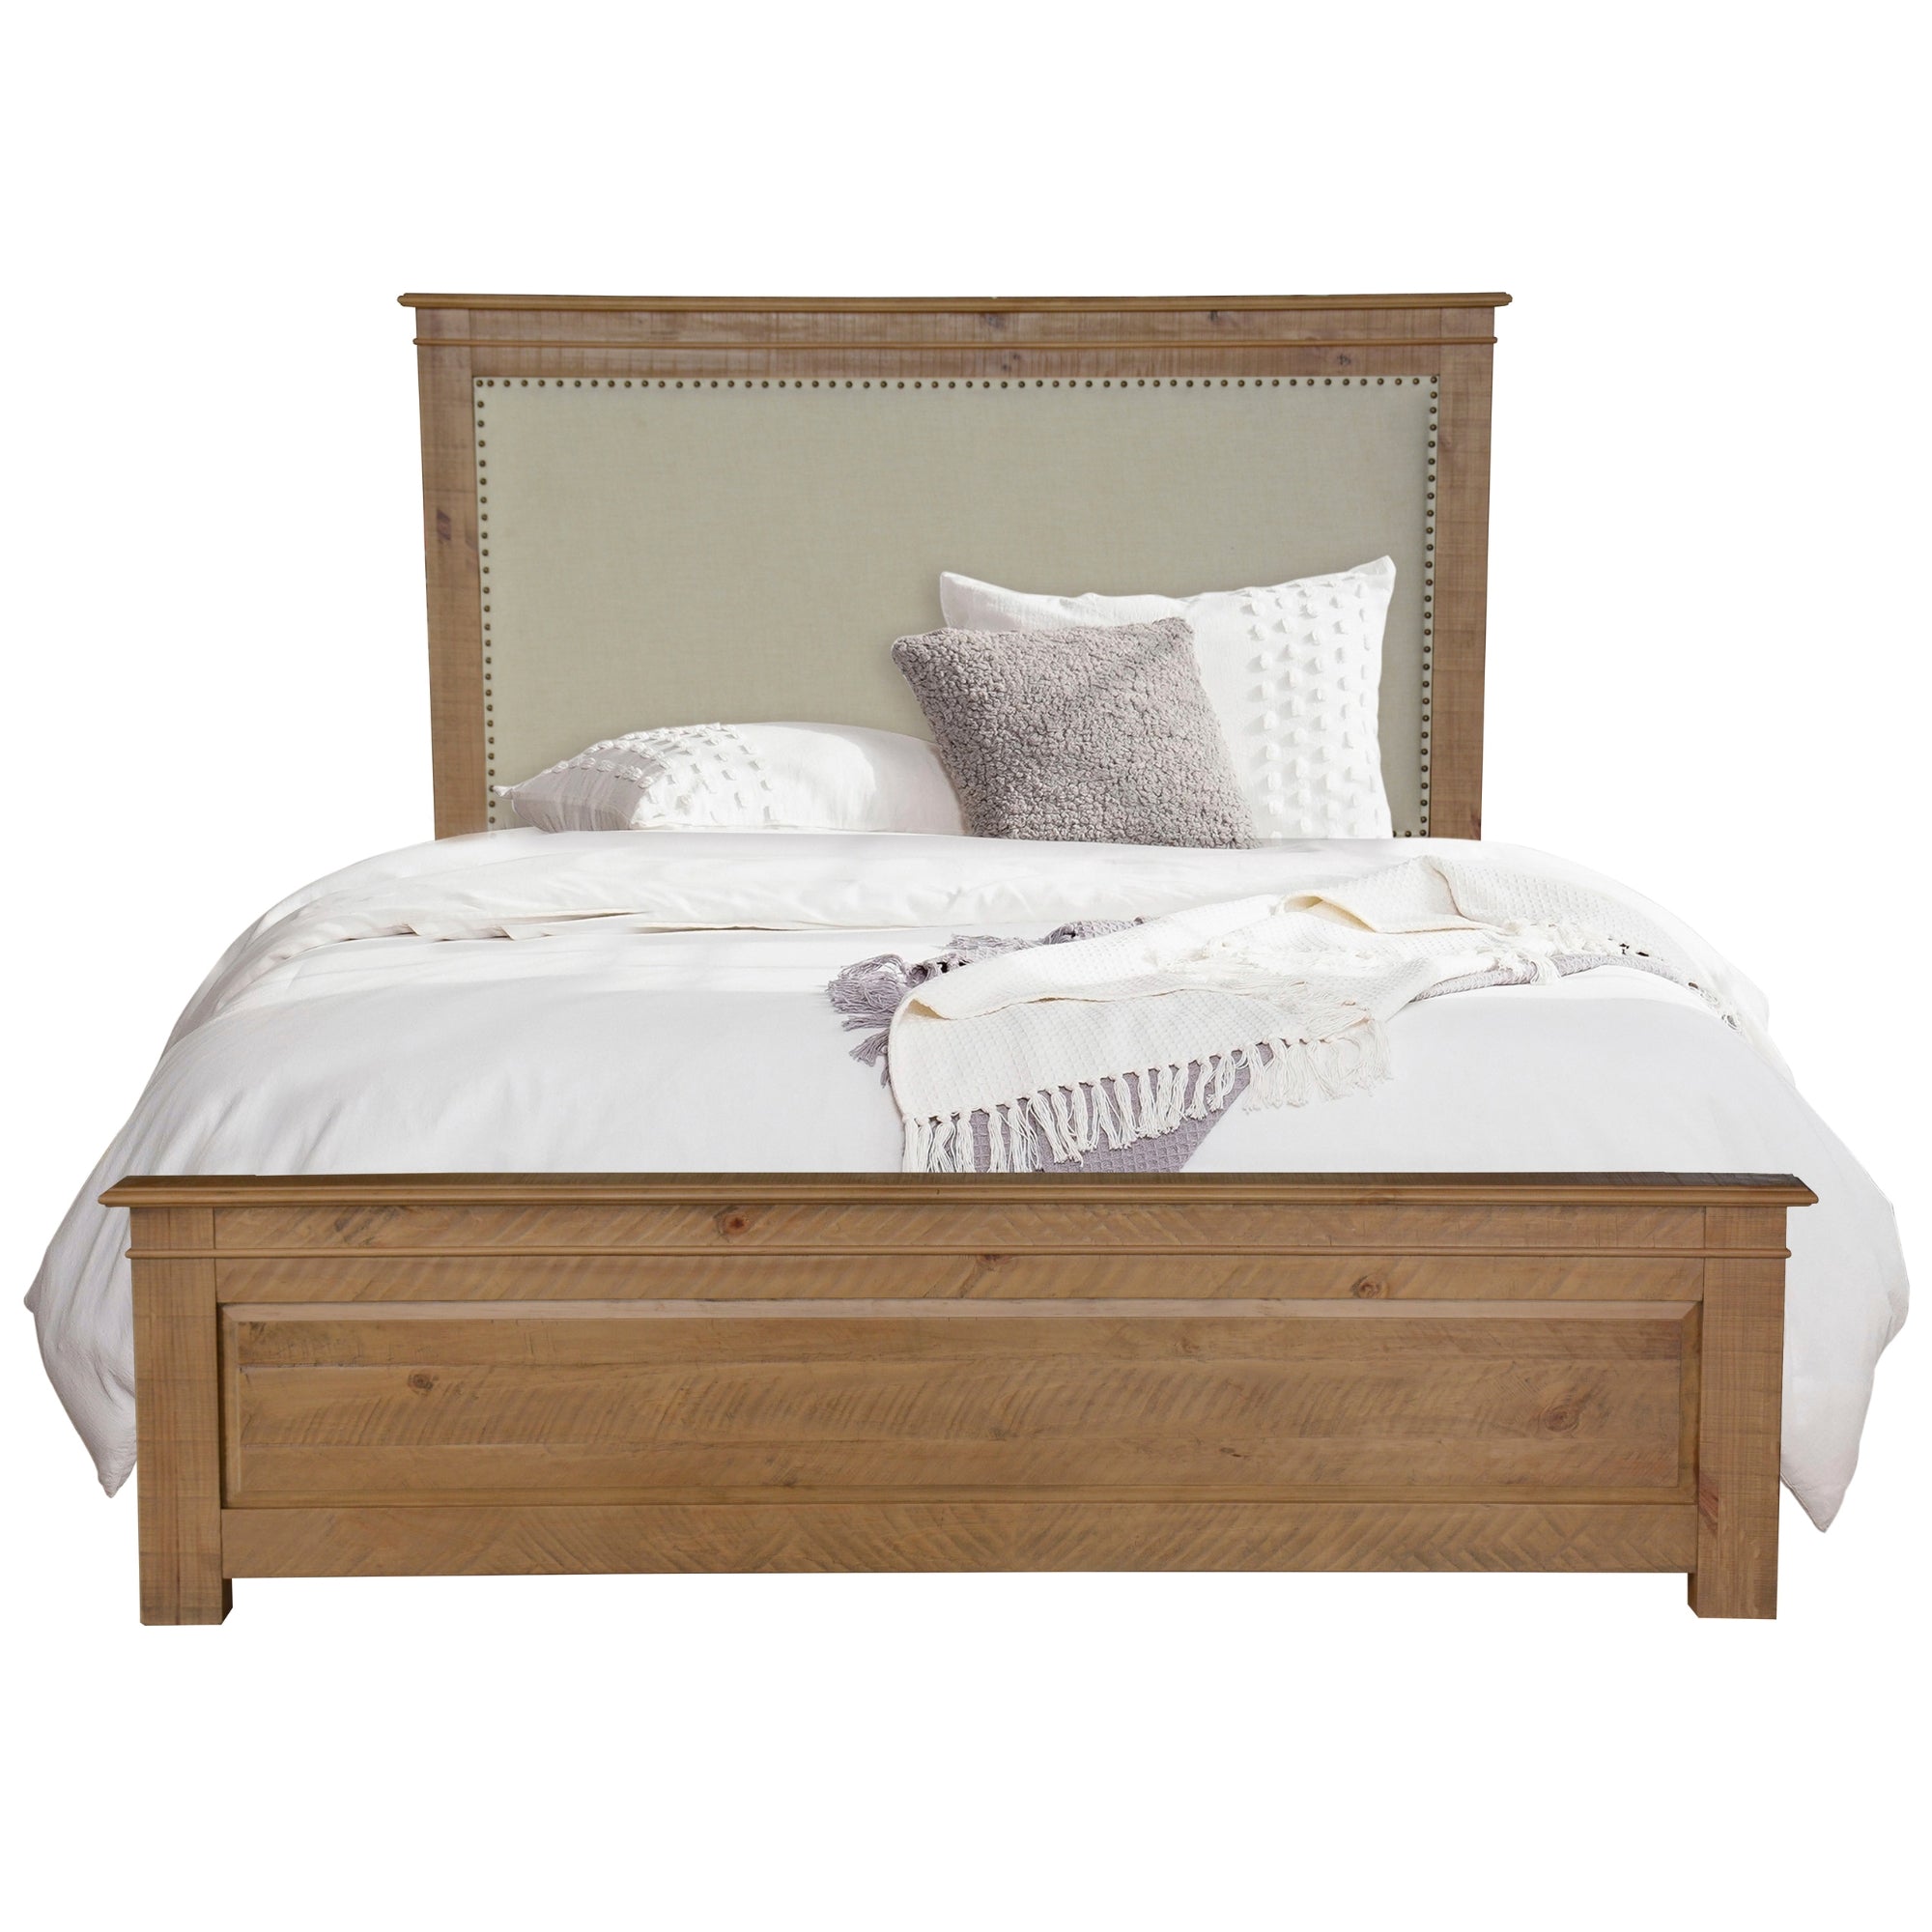 Rustic French 5pc Queen Bed Suite, Solid Pine Wood, Jade